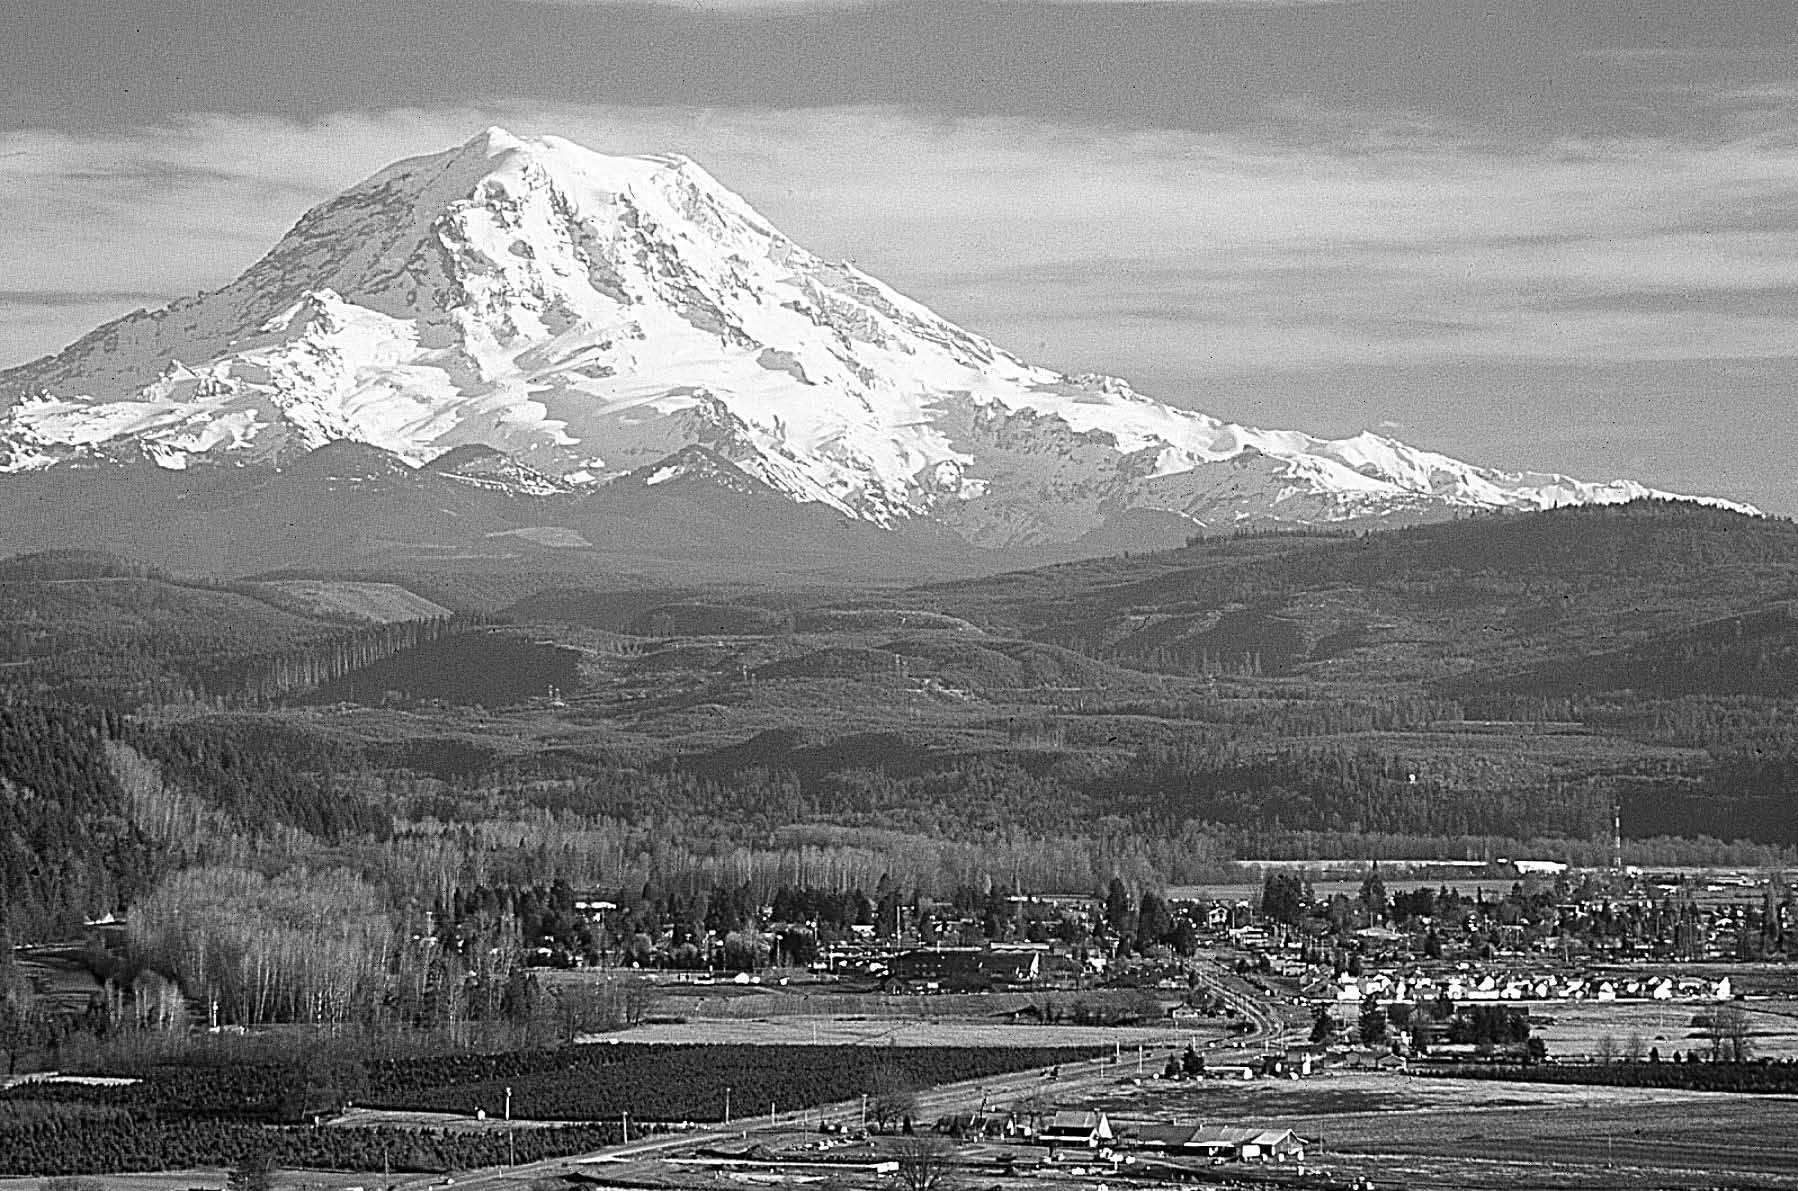 [View of Mount Rainier from across Puyallup River valley near Orting, Washington. (USGS photograph taken by David Wieprecht, Cascades Volcano Observatory.] 